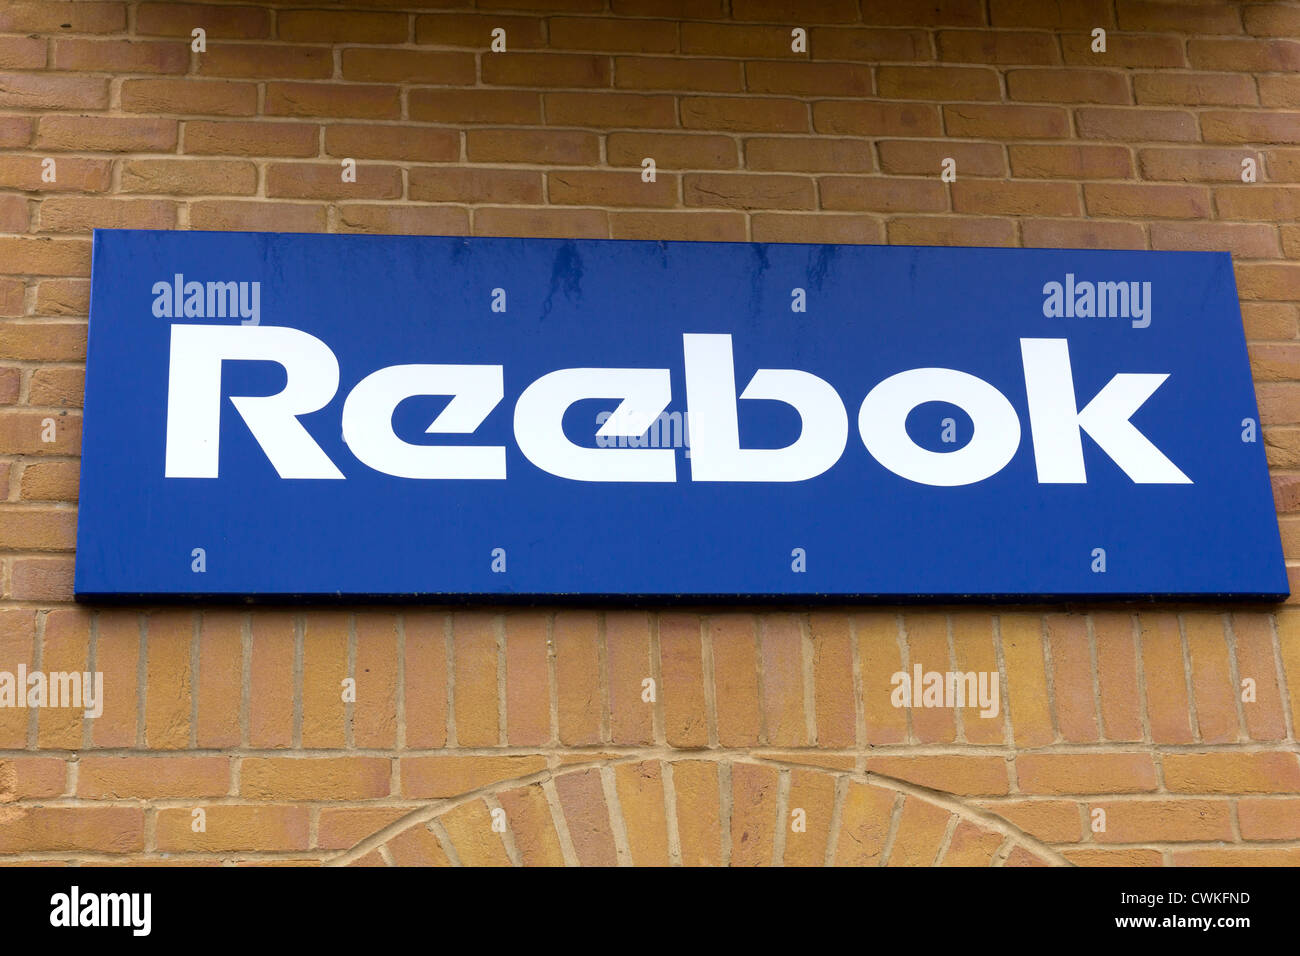 Reebok Outlet High Resolution Stock Photography and Images - Alamy